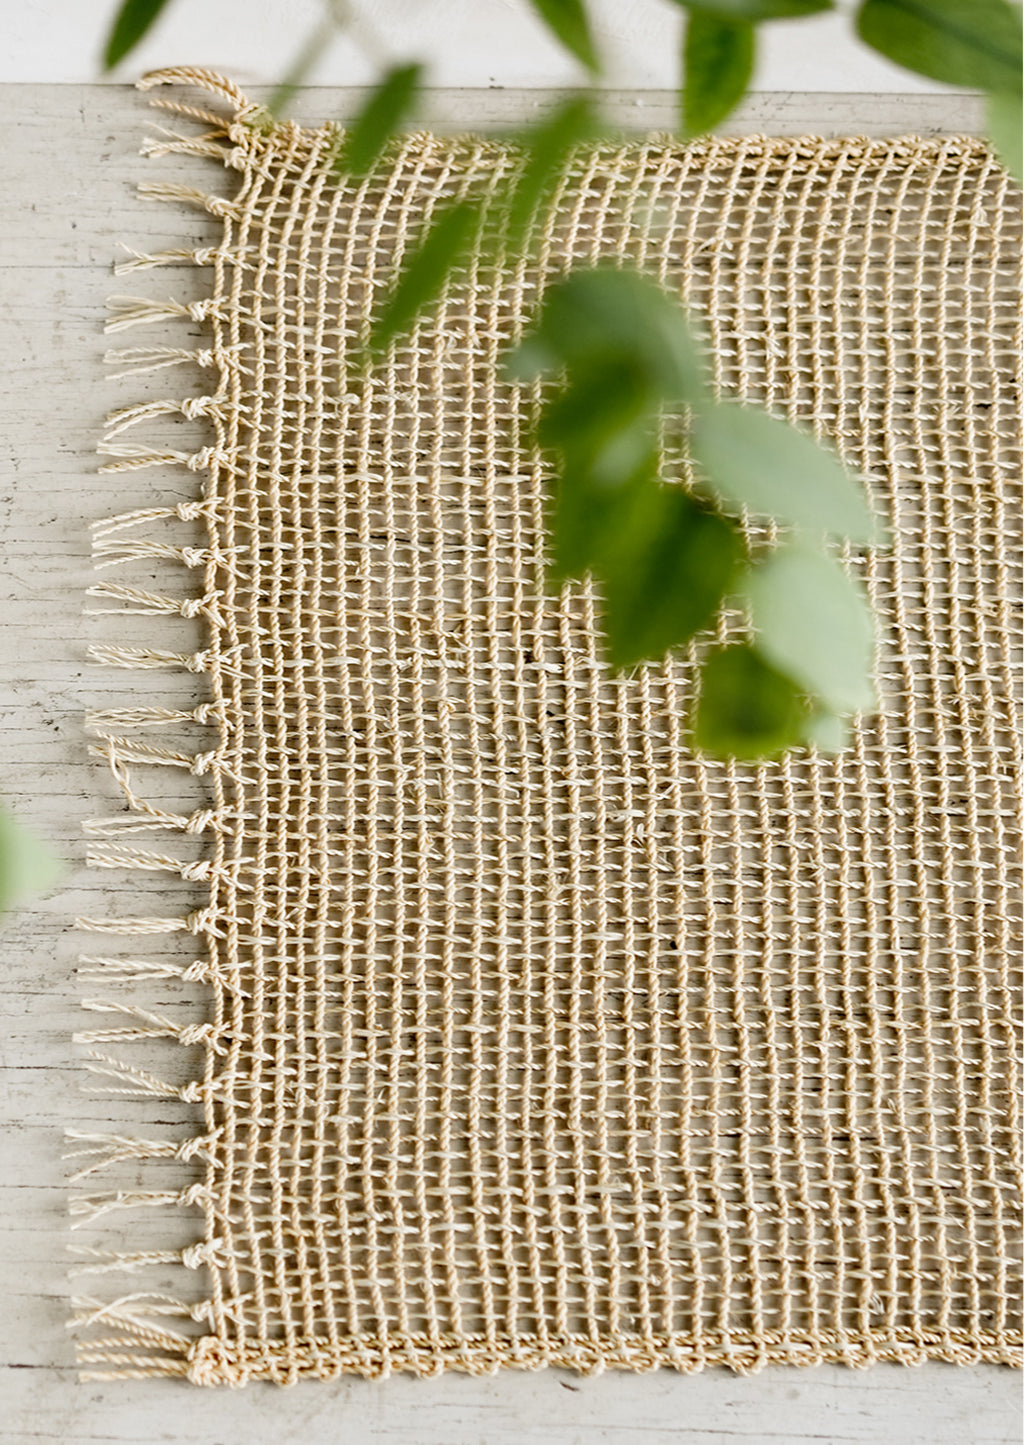 Natural: An open weave placemat made from natural straw.